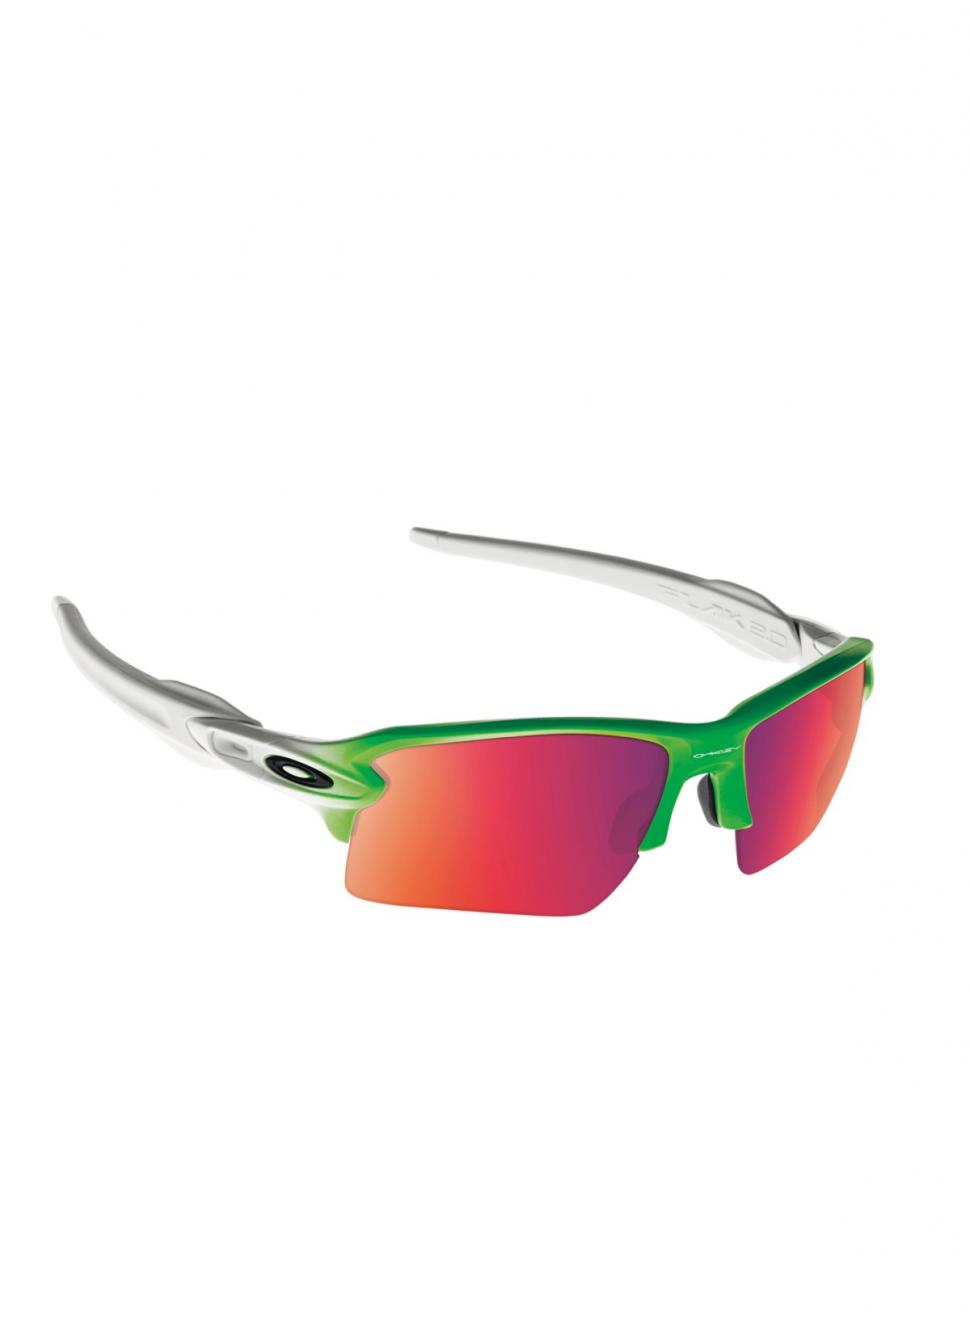 Happening appel forbedre Oakley launches Green Fade eyewear collection | road.cc